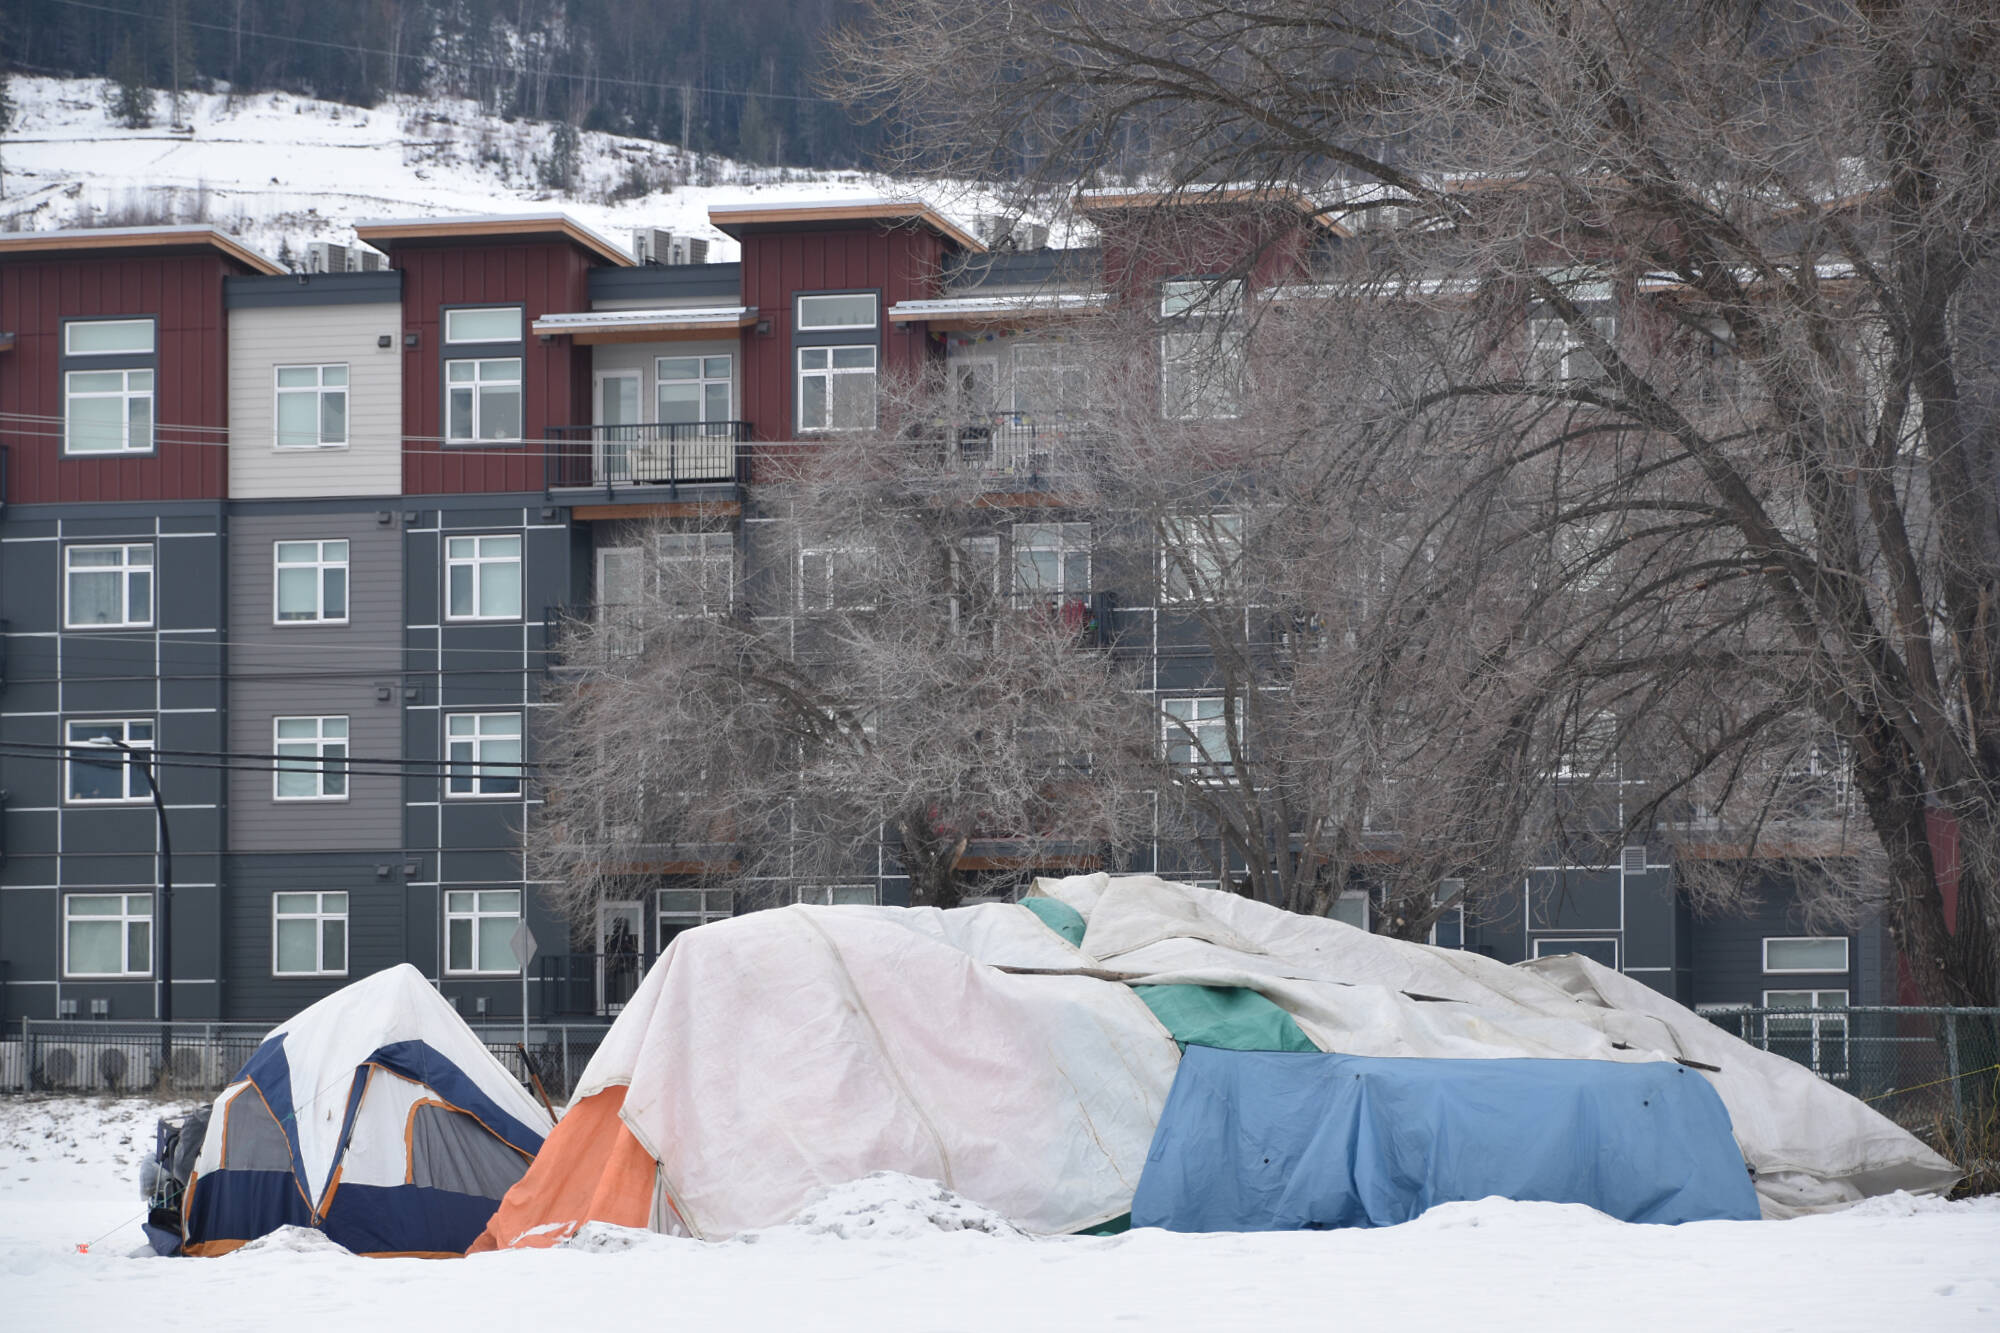 City council decided on Feb. 27 that a tent encampment on 3rd Street SW, across from the Salvation Army building in Salmon Arm, must be moved by March 15.
(Martha Wickett /Salmon Arm Observer)